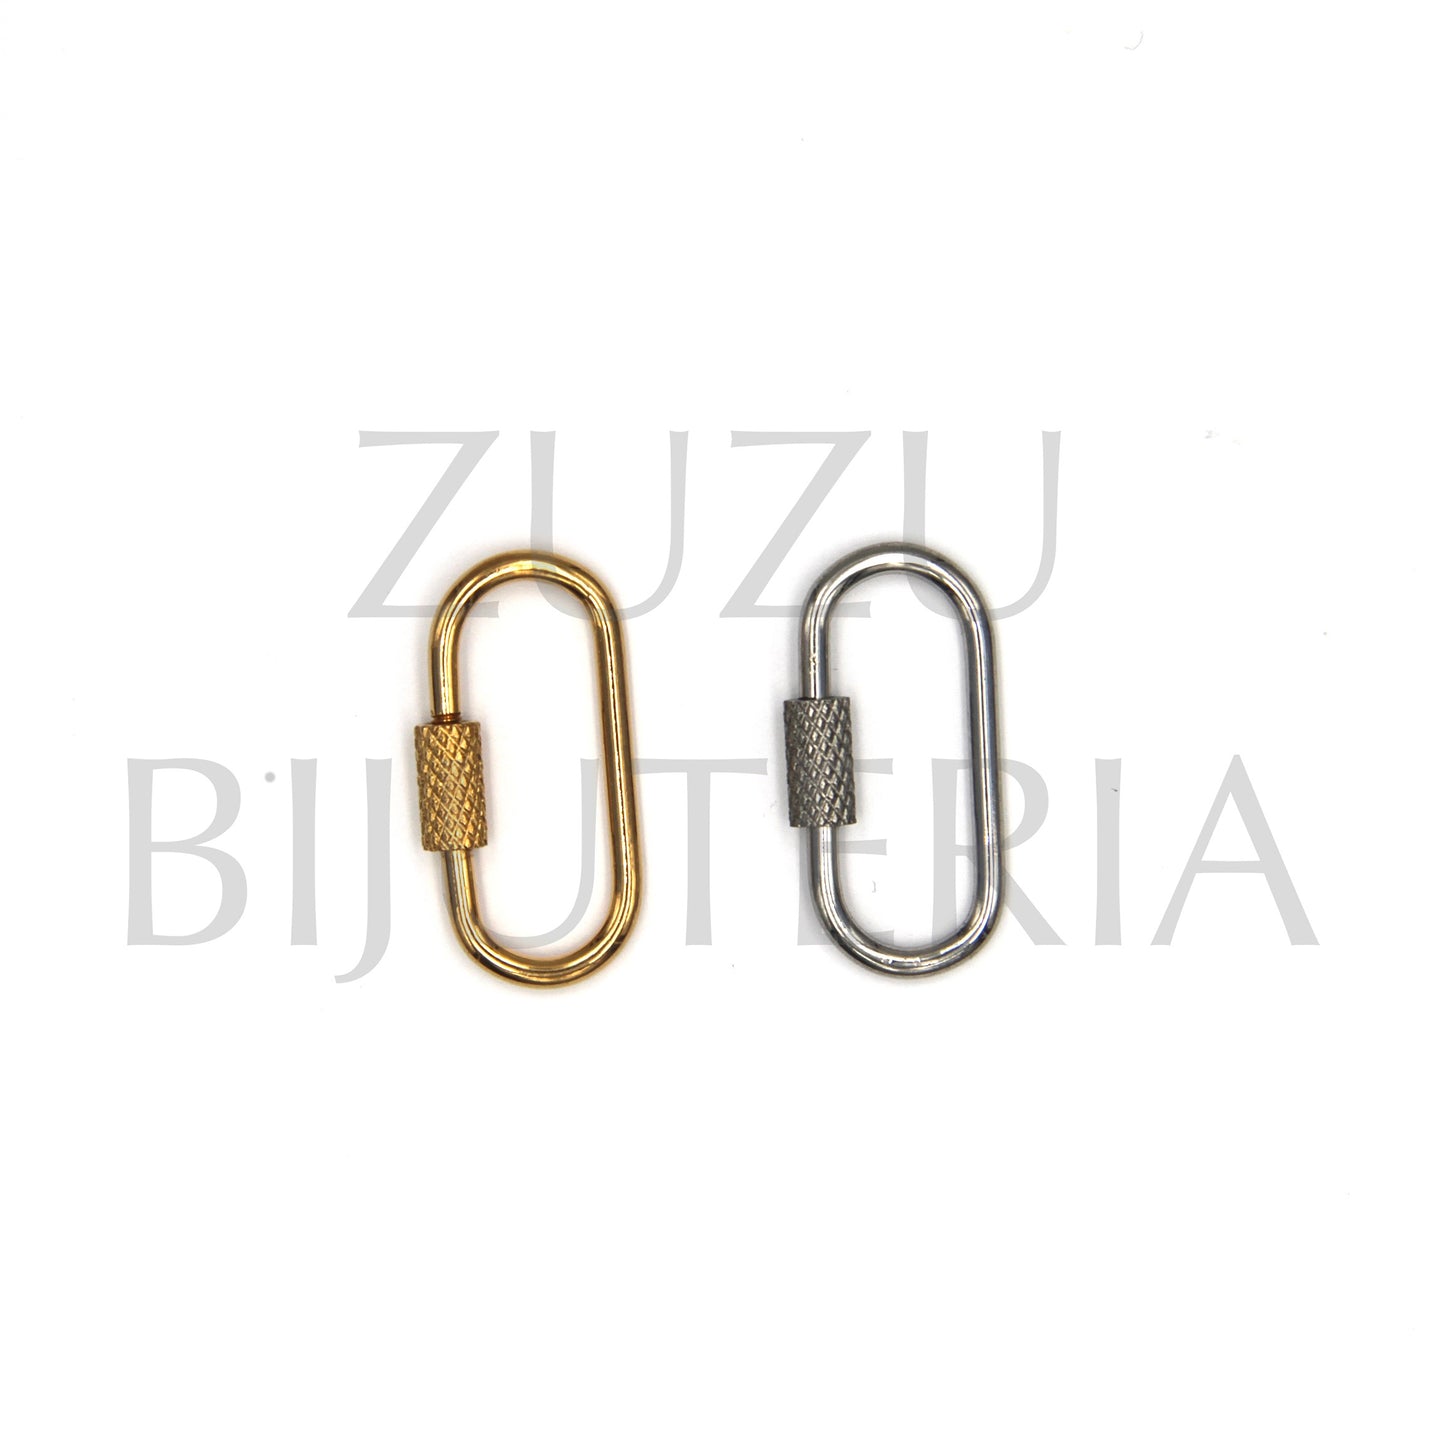 Pendant/Oval Clasp 27mm x 13mm - Stainless Steel